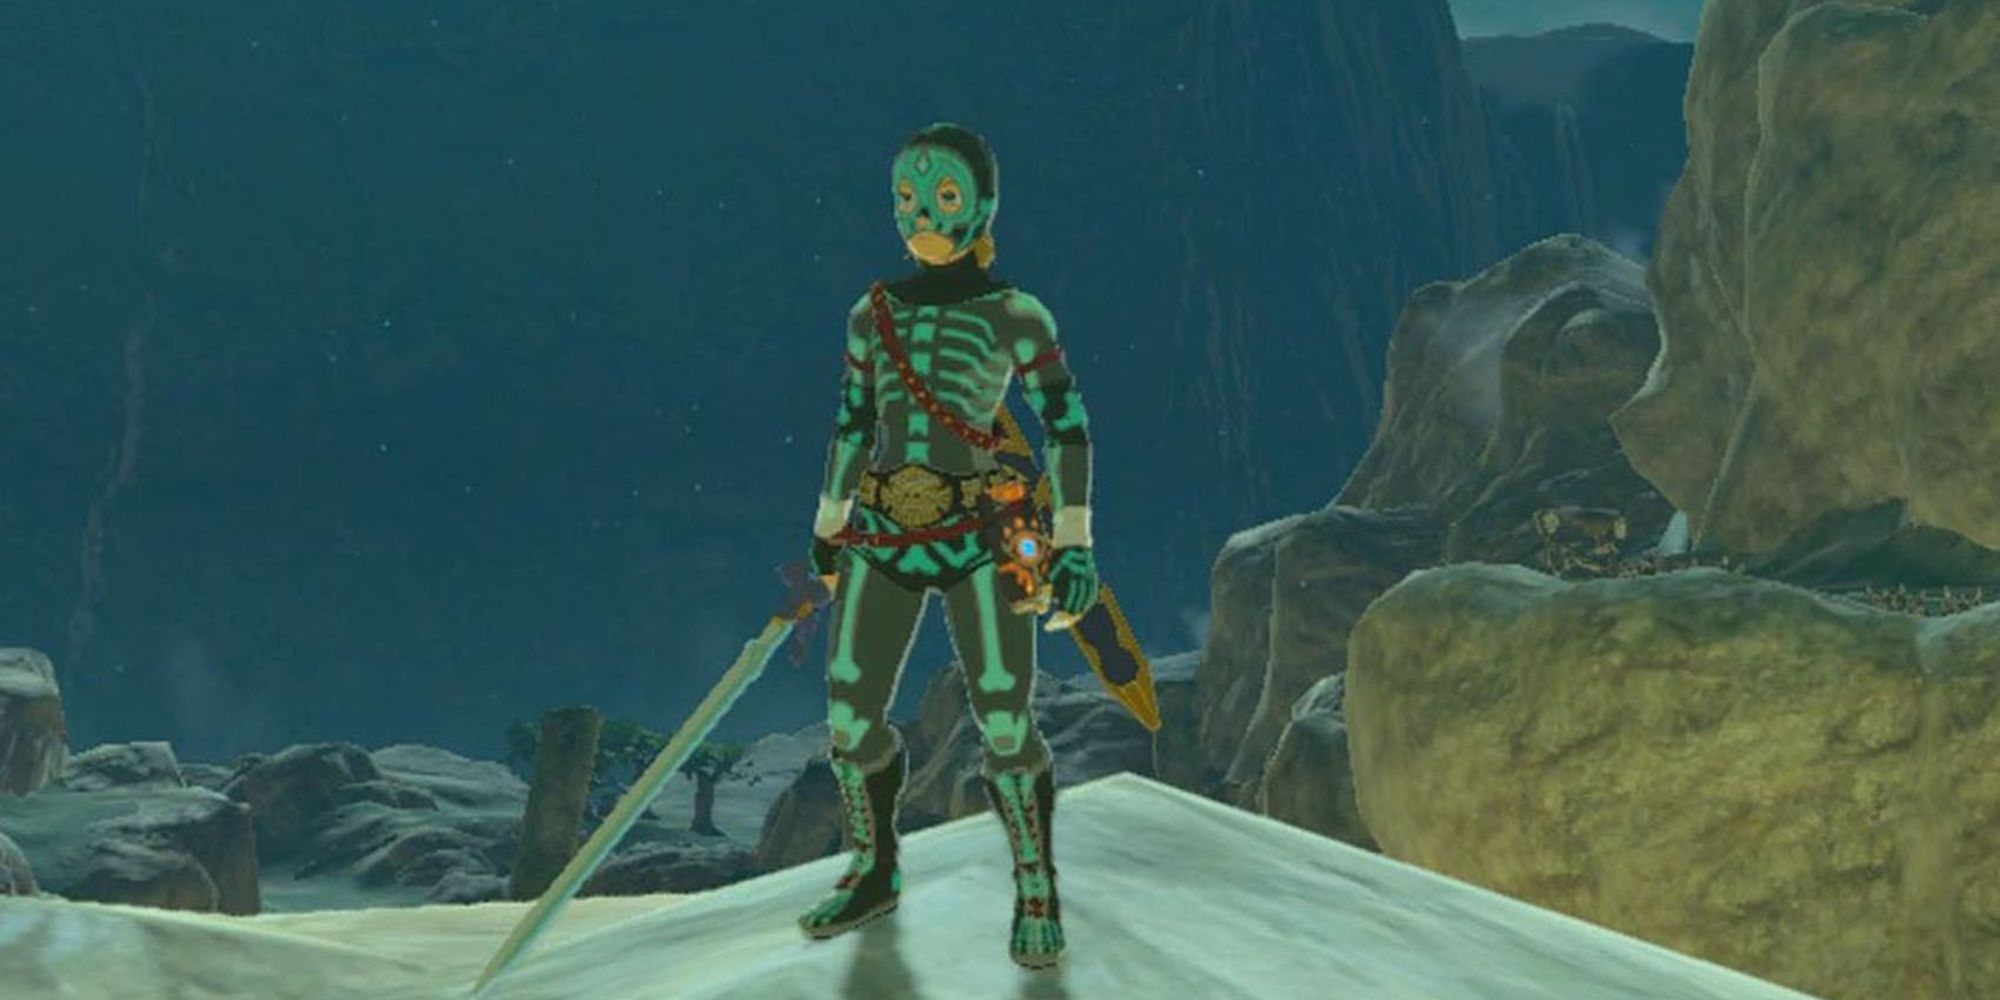 Link stands on a cliff at night while wearing the Radiant Armor